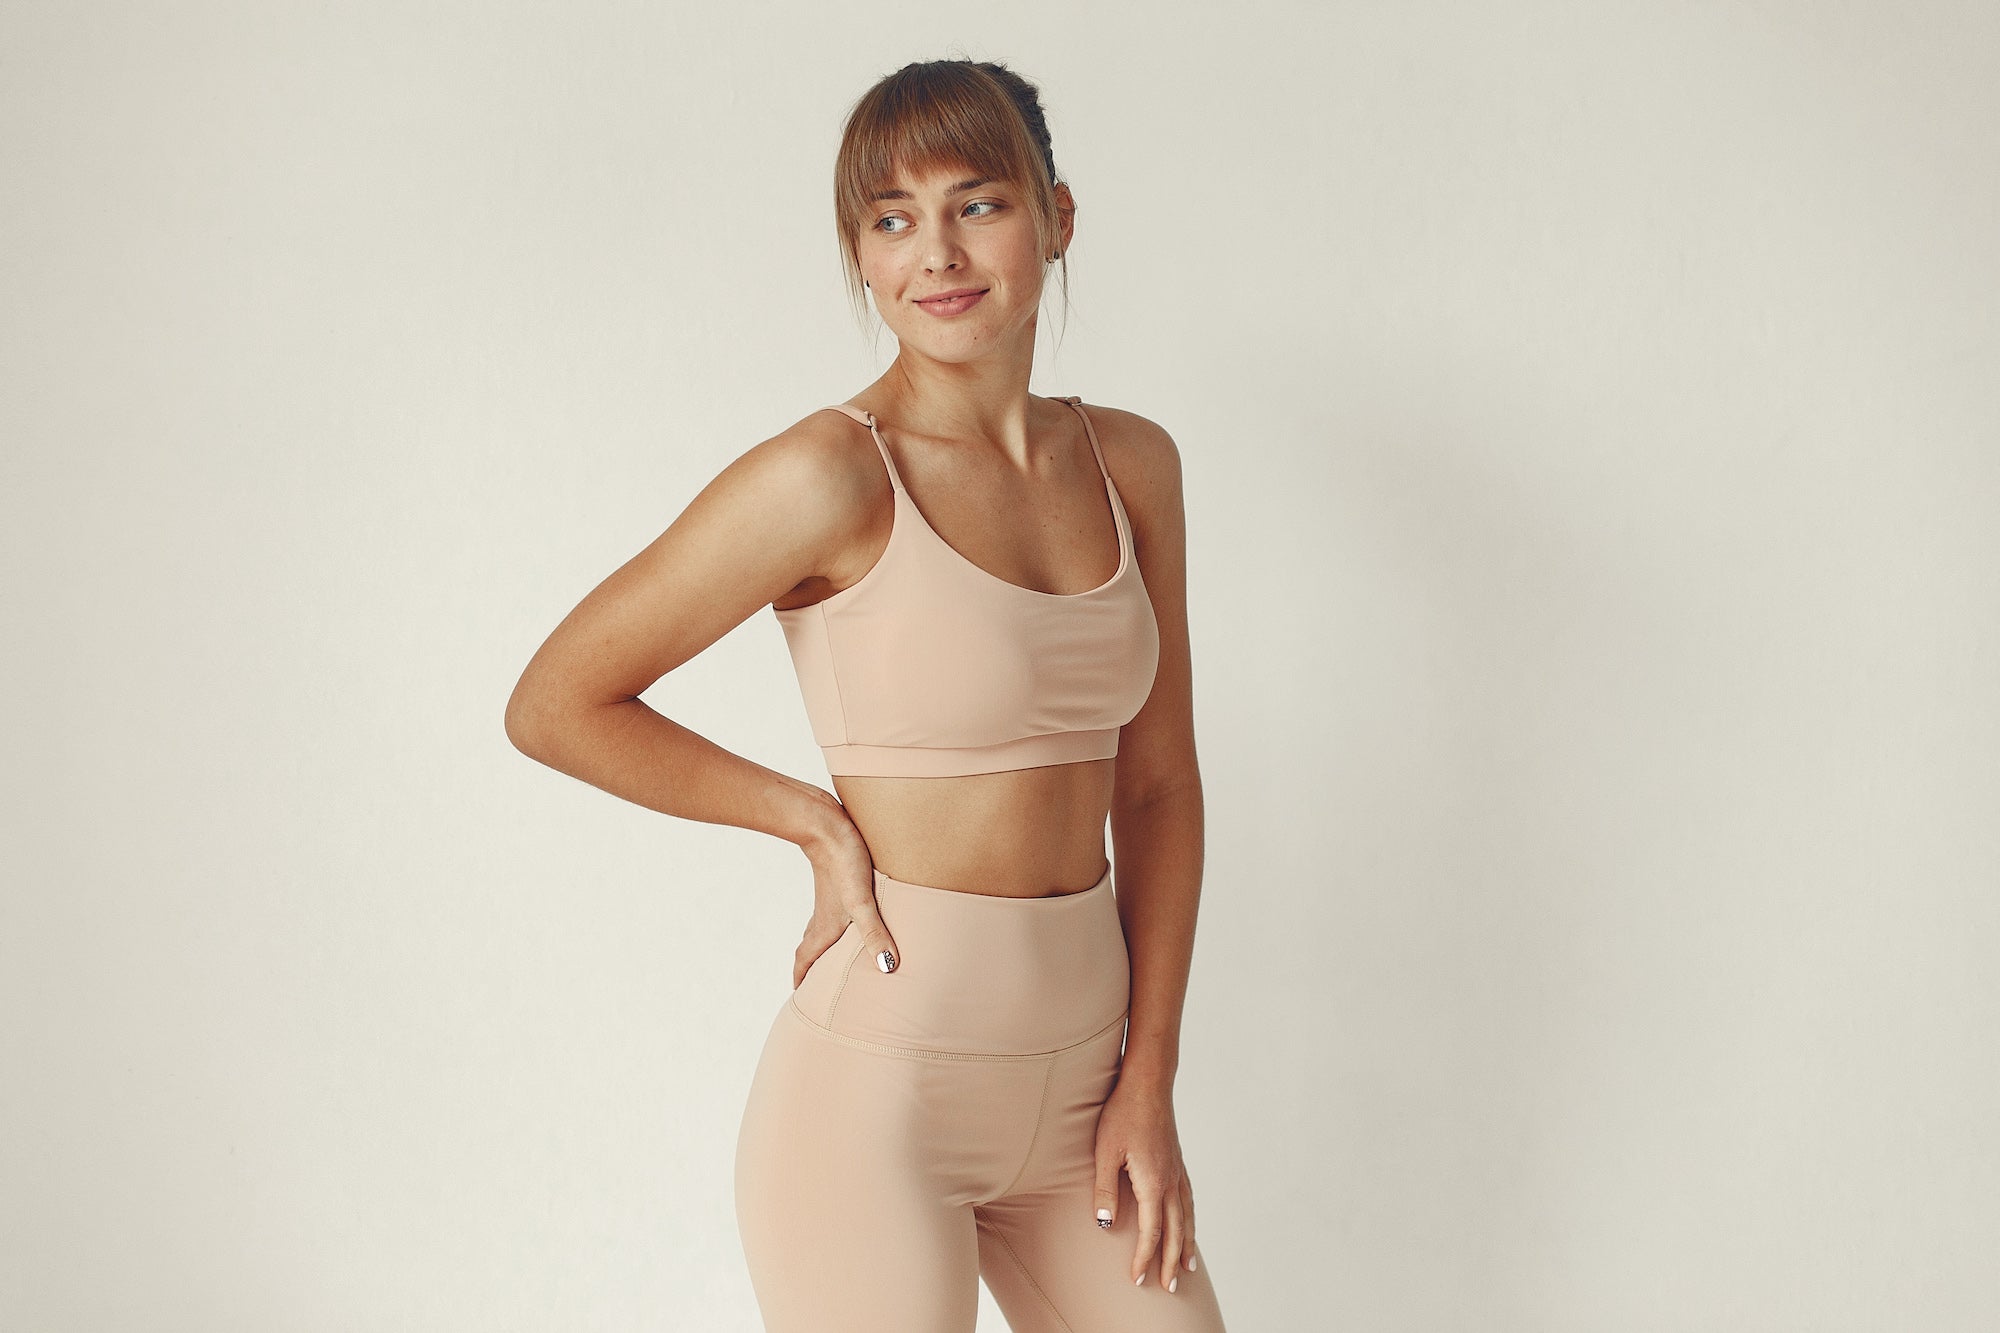 It's time to get back into shapewear